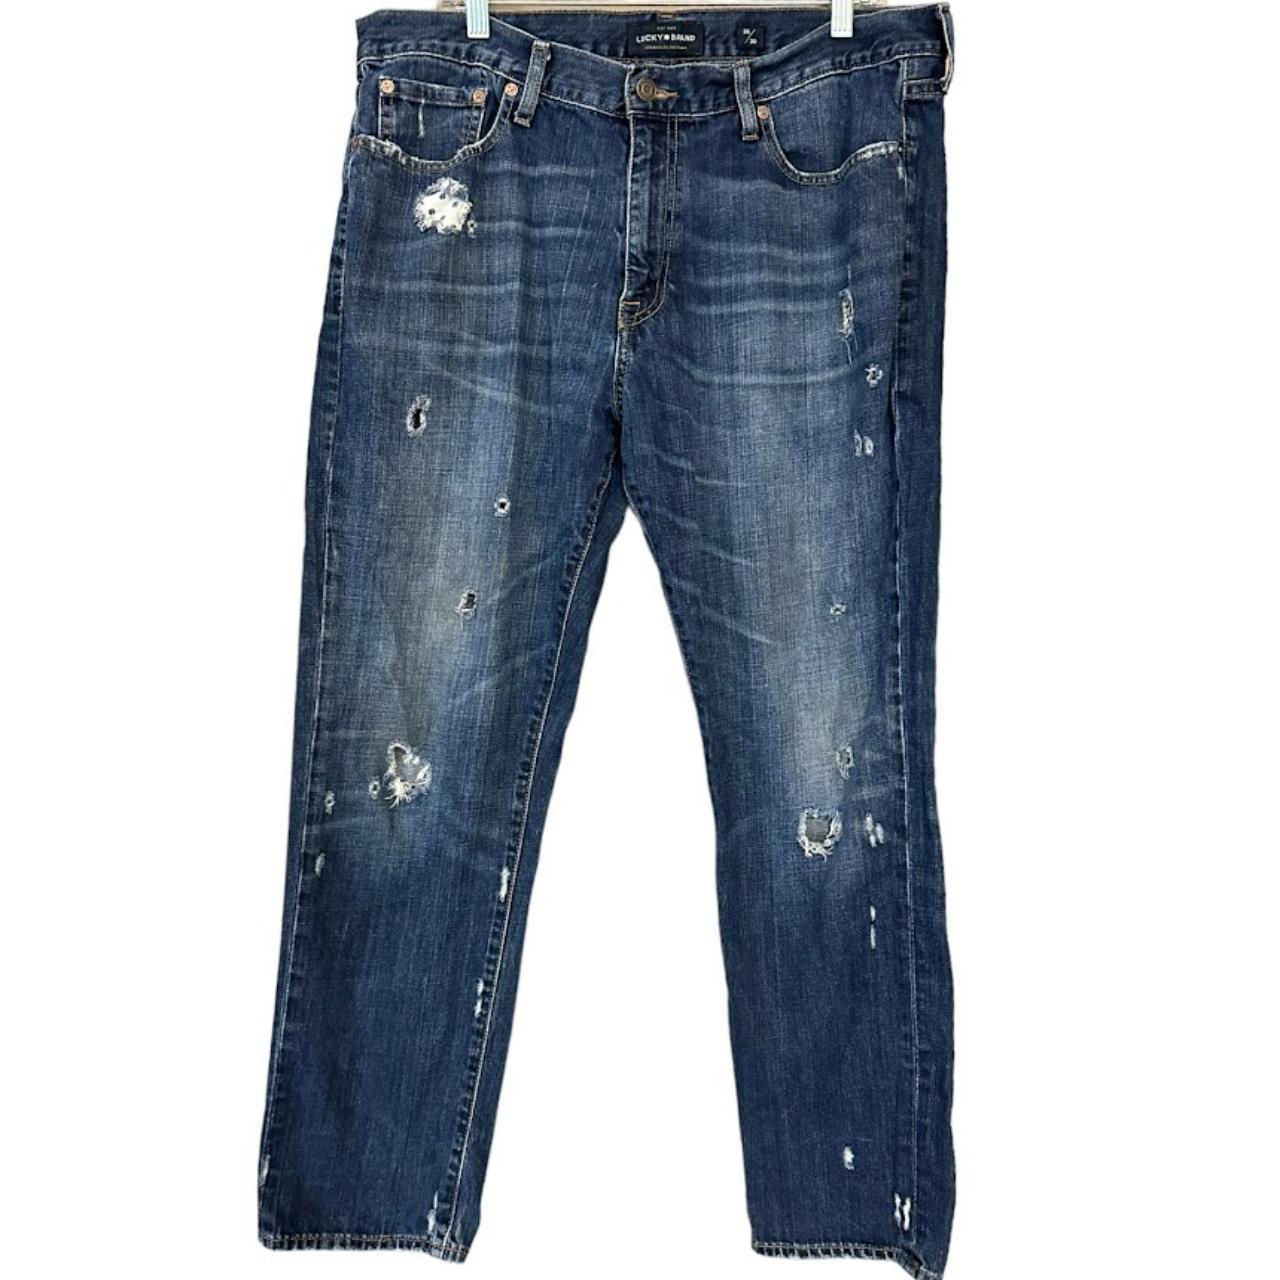 Lucky Brand Jeans 410 Athletic Slim Fit Distressed - Depop